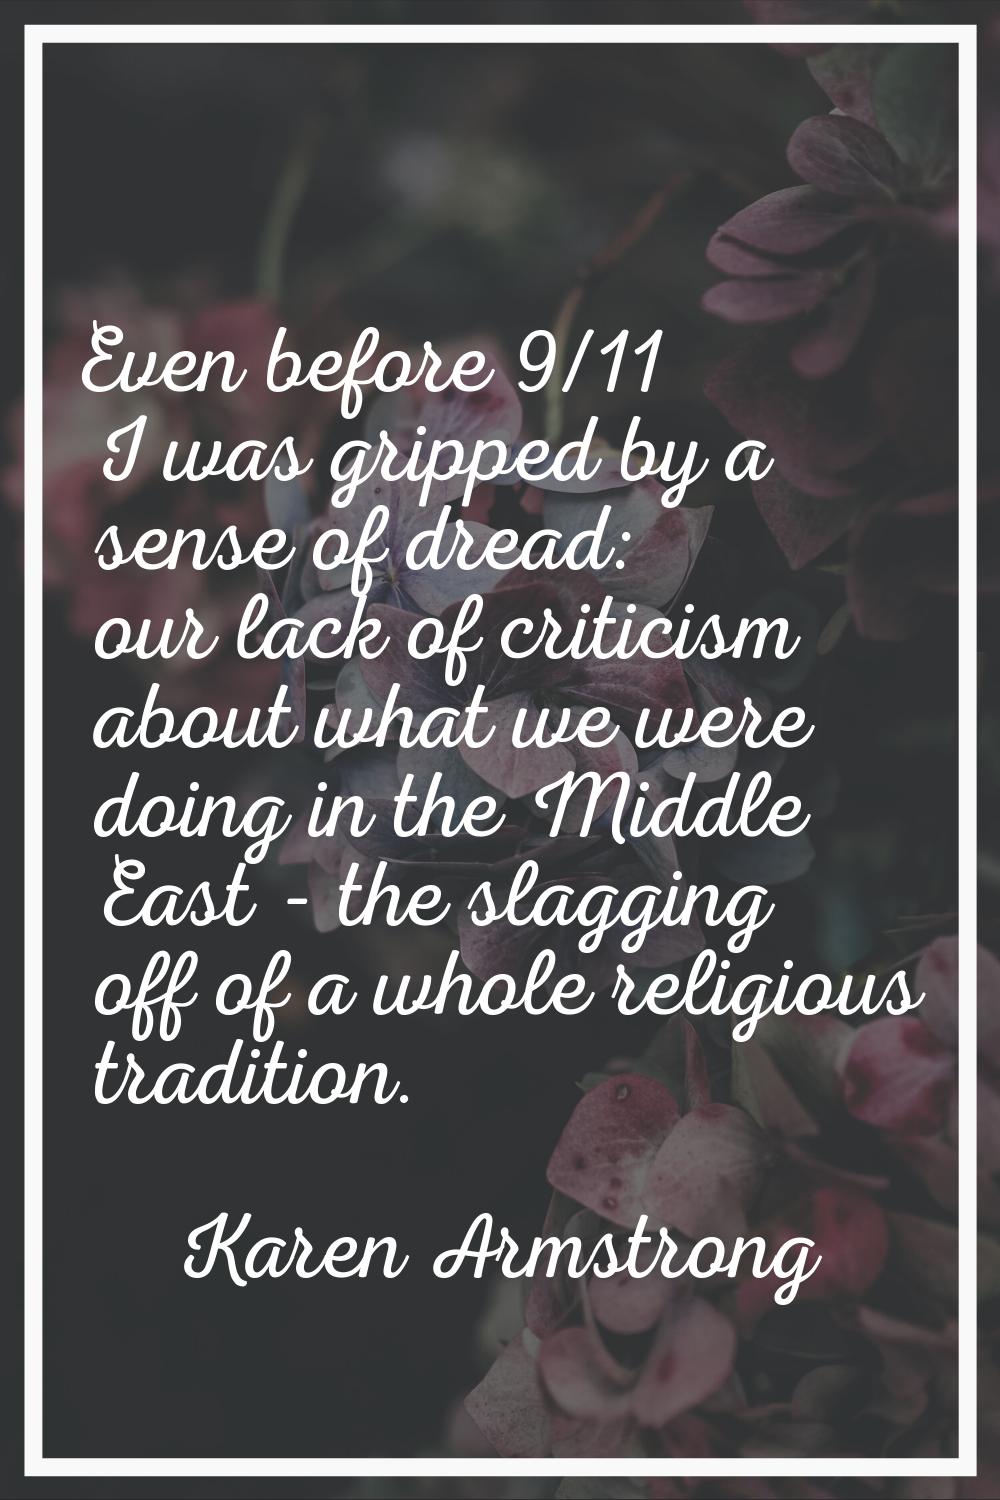 Even before 9/11 I was gripped by a sense of dread: our lack of criticism about what we were doing 